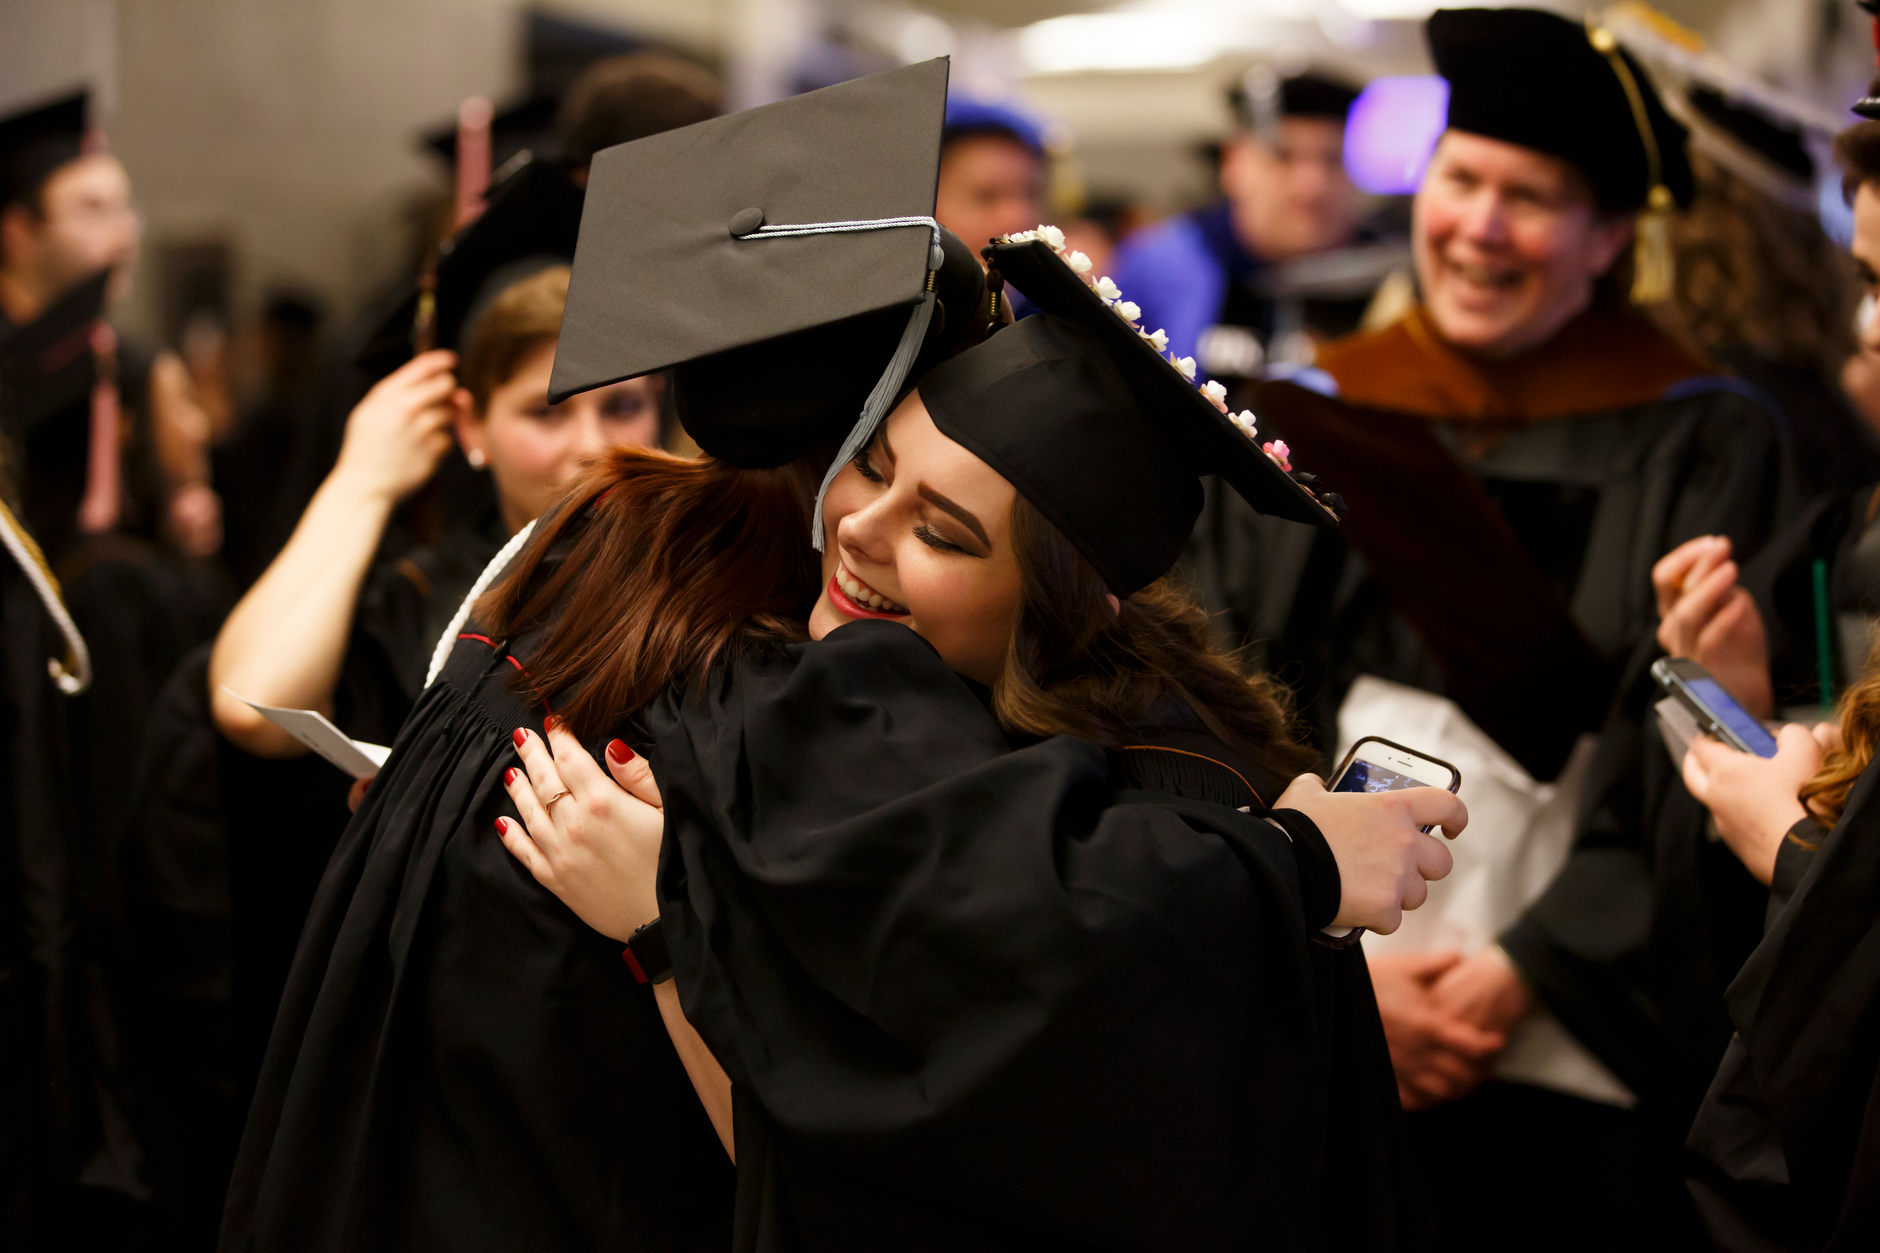 Indiana University Fort Wayne graduates share a hug before the Purdue Fort Wayne and IU Fort Wayne Commencement at the Allen County War Memorial Coliseum on Wednesday, May 8, 2019. (James Brosher/Indiana University)